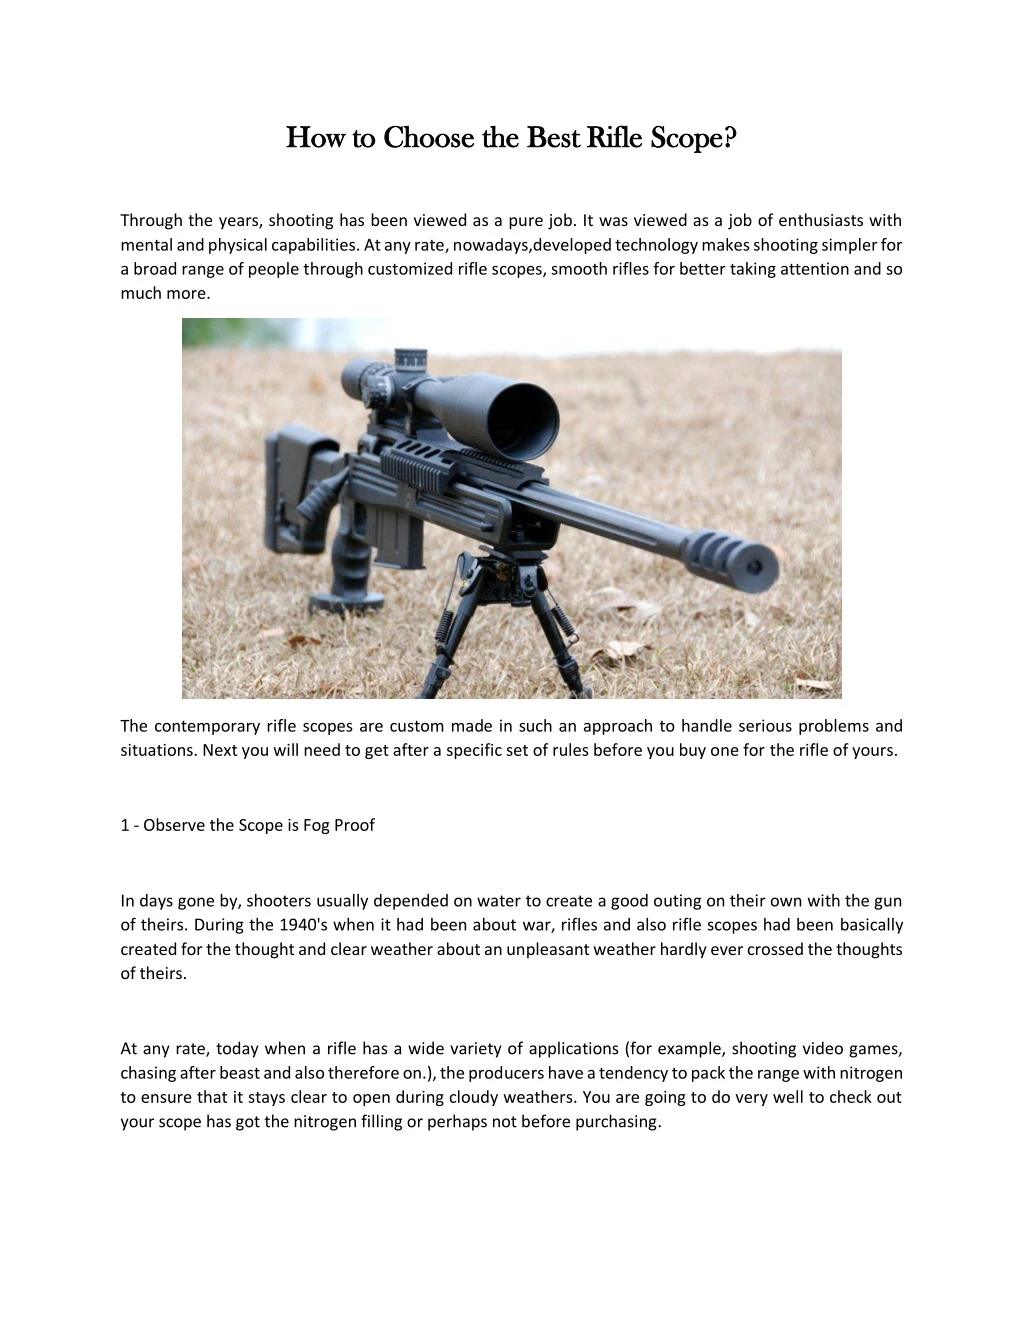 how to choose the best rifle scope how to choose